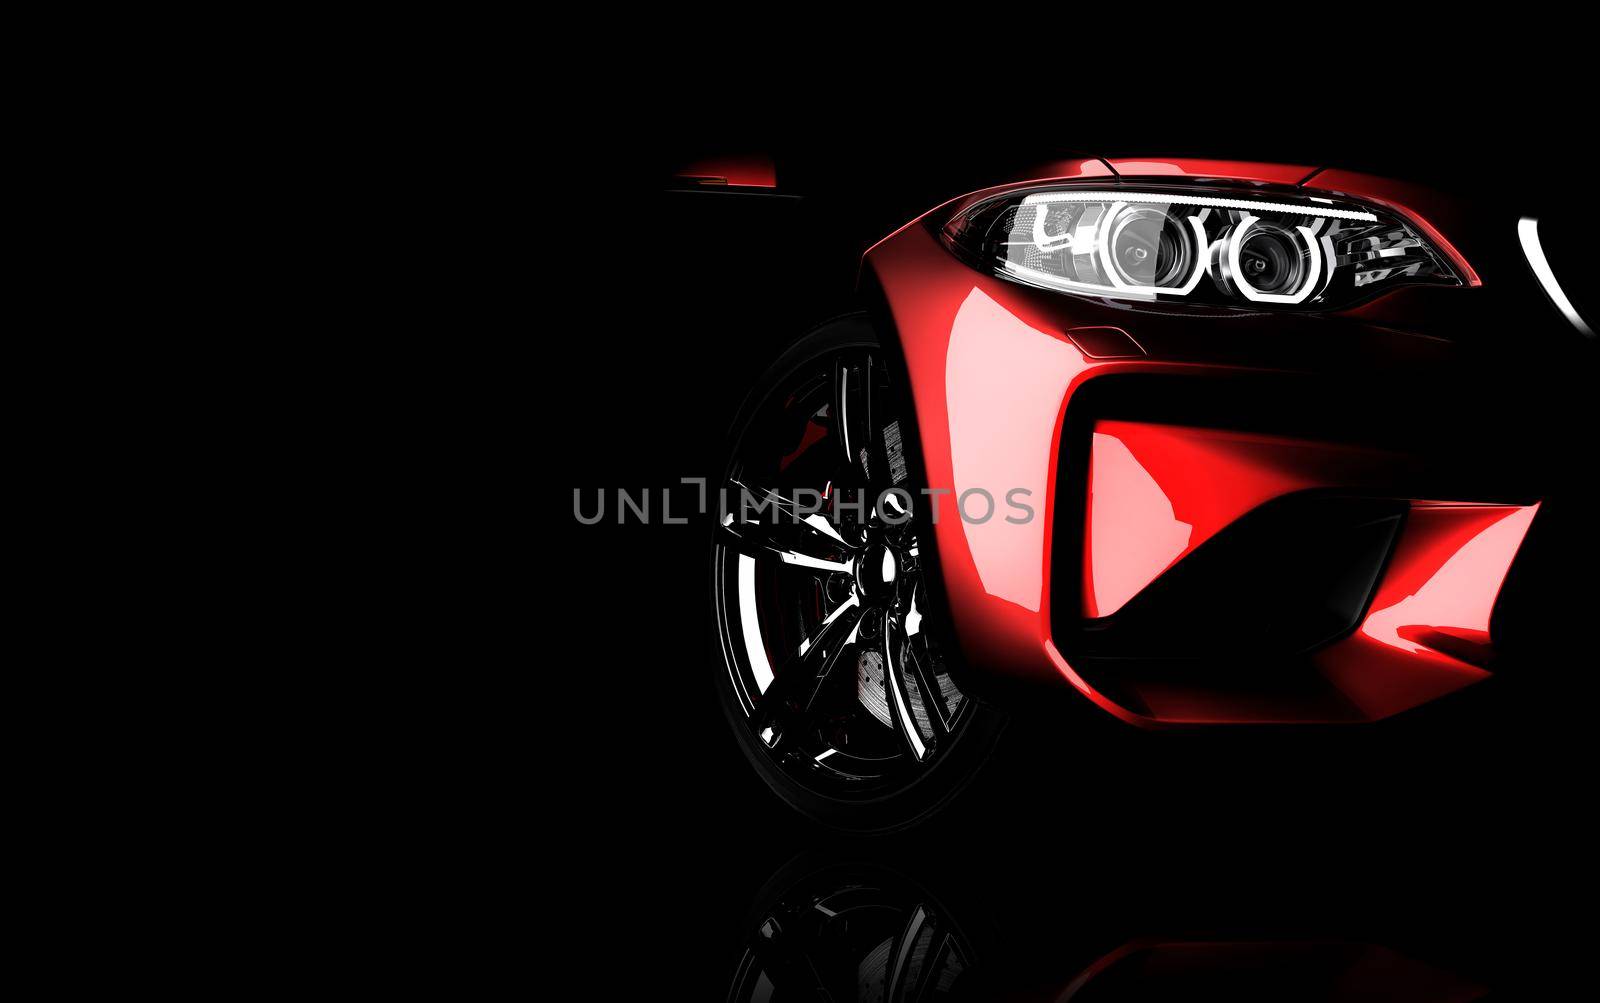 Generic red sport unbranded car isolated on a dark background. 3d illustration